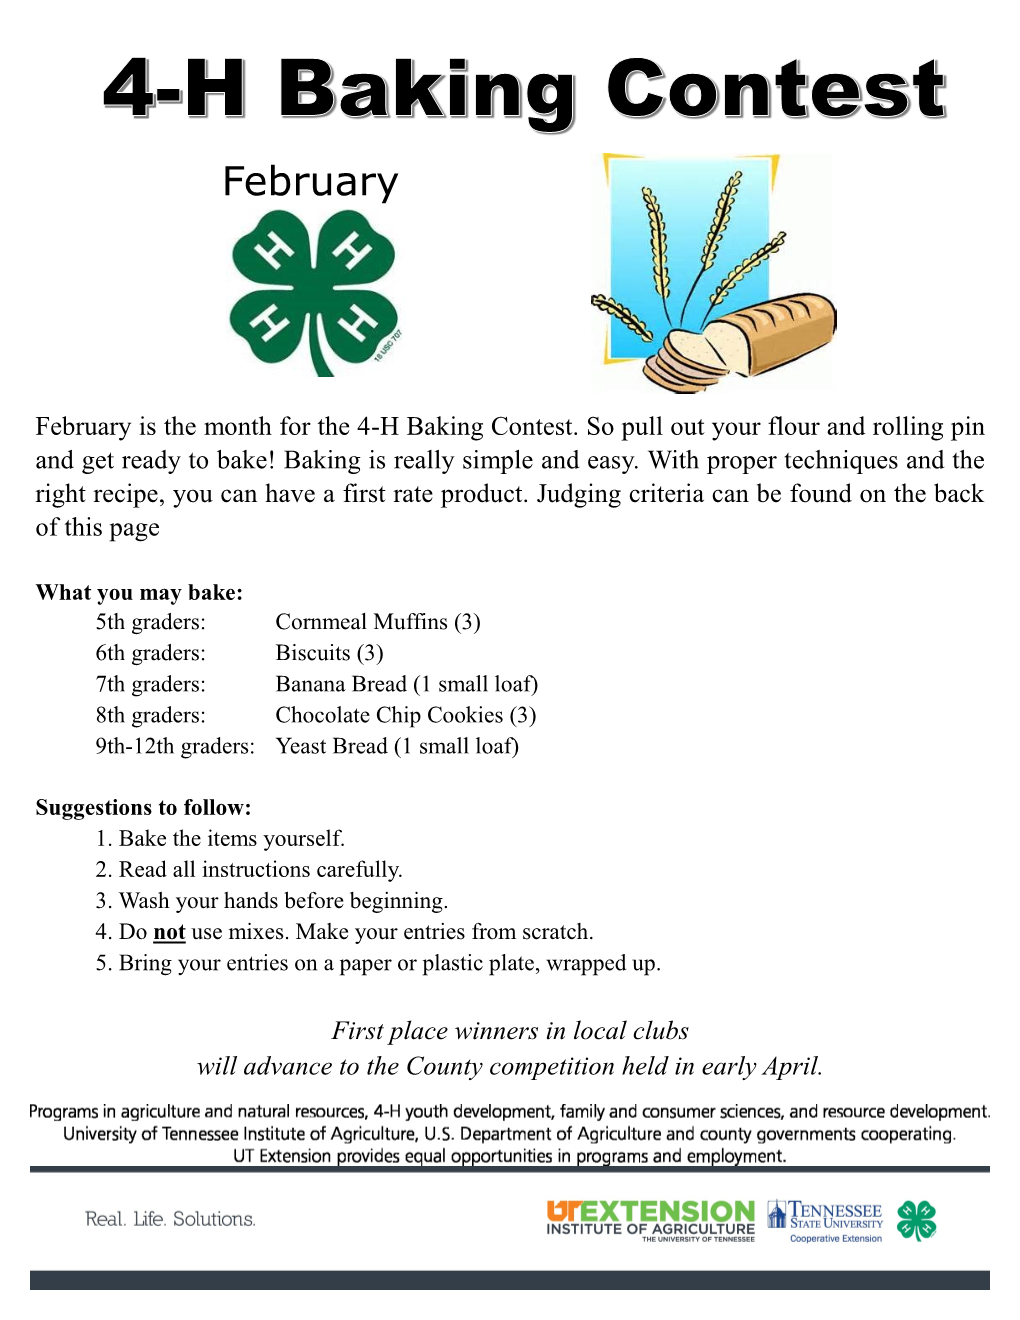 Baking Contest Flyer and Guidelines